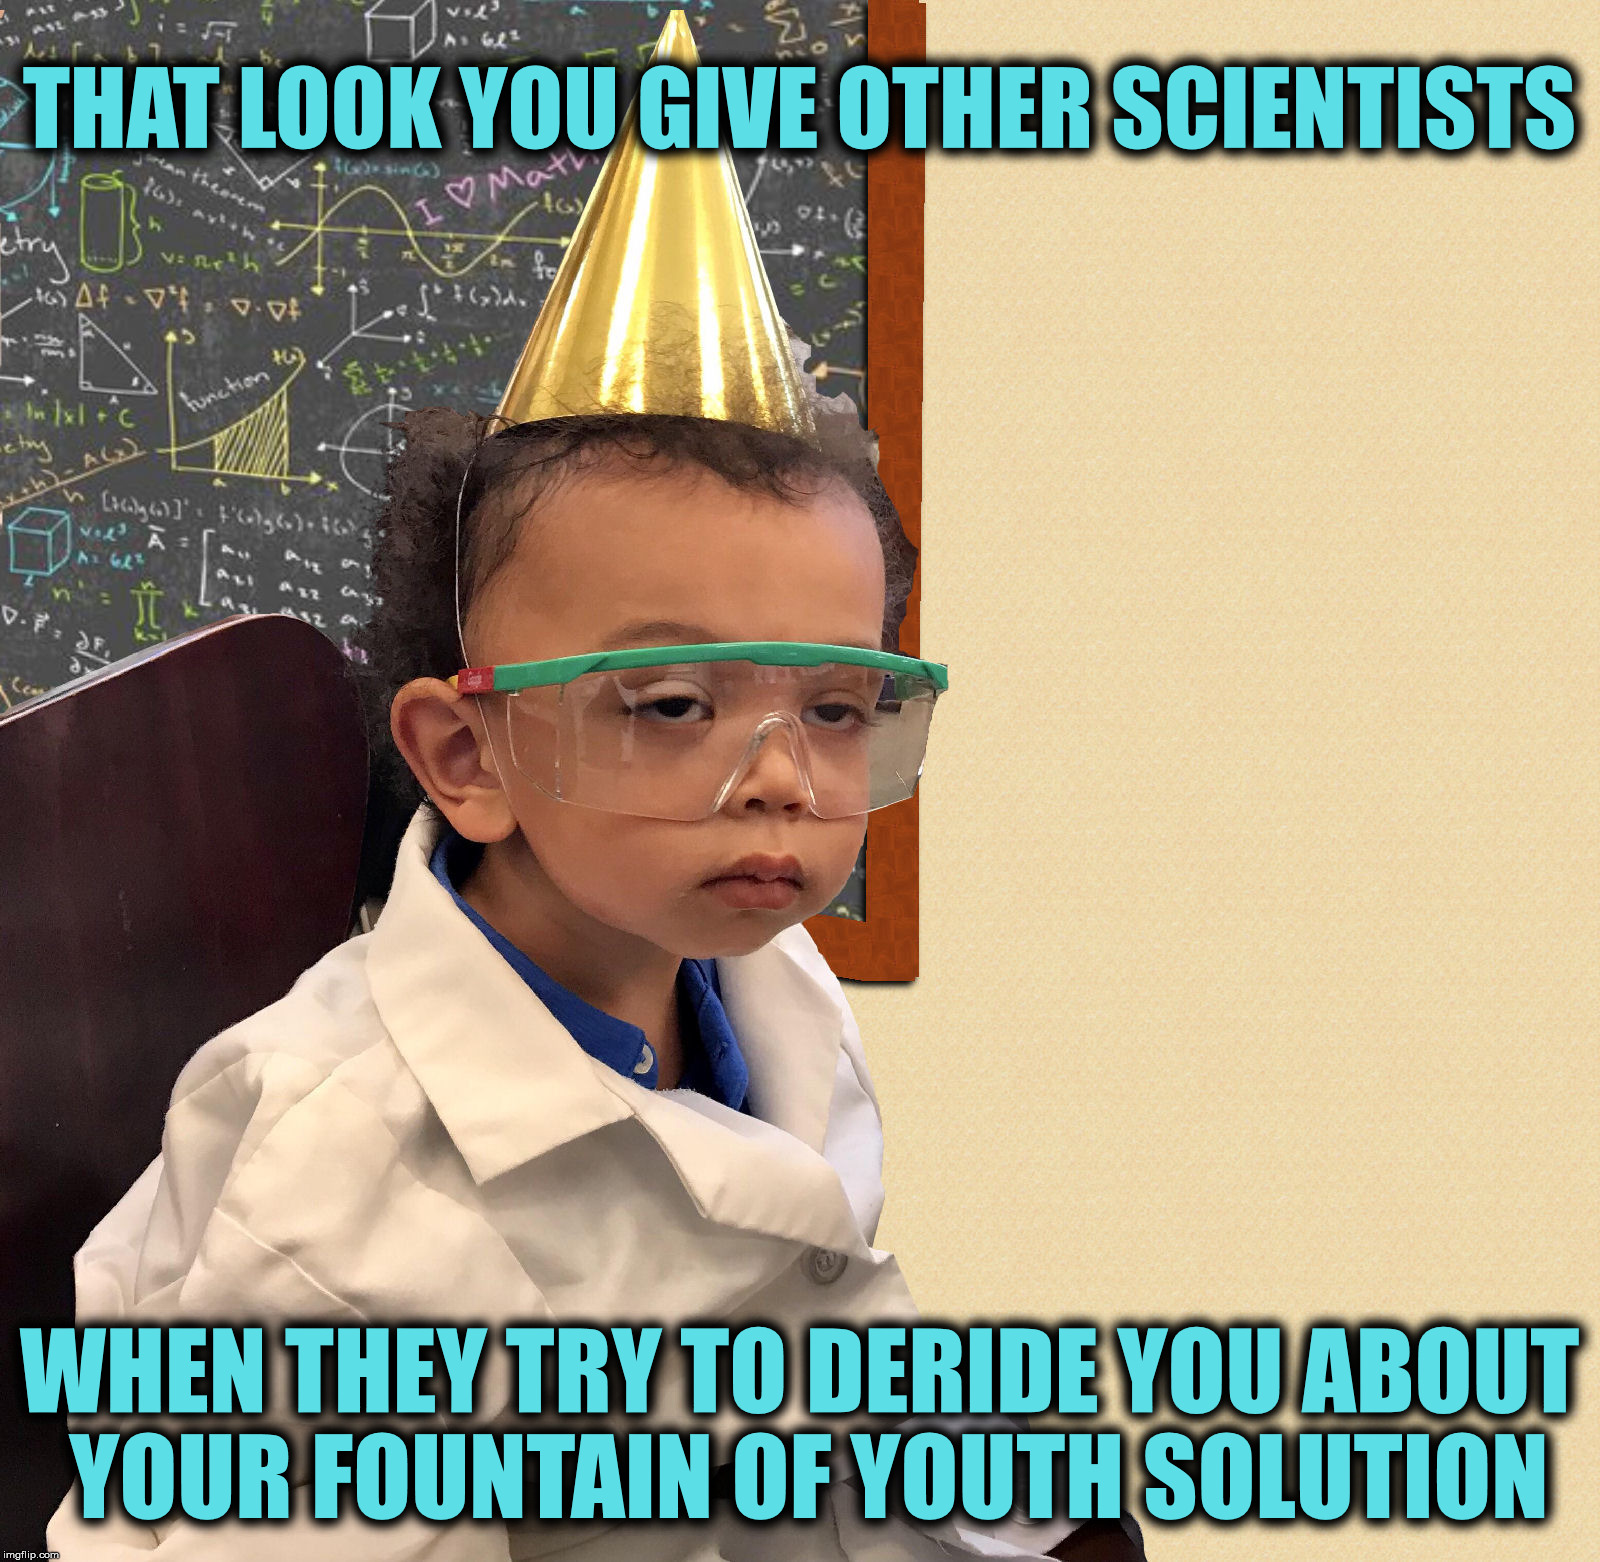 There are always those who scoff at scientific achievements  | THAT LOOK YOU GIVE OTHER SCIENTISTS; WHEN THEY TRY TO DERIDE YOU ABOUT YOUR FOUNTAIN OF YOUTH SOLUTION | image tagged in little professor,fountain of youth,that look you give | made w/ Imgflip meme maker